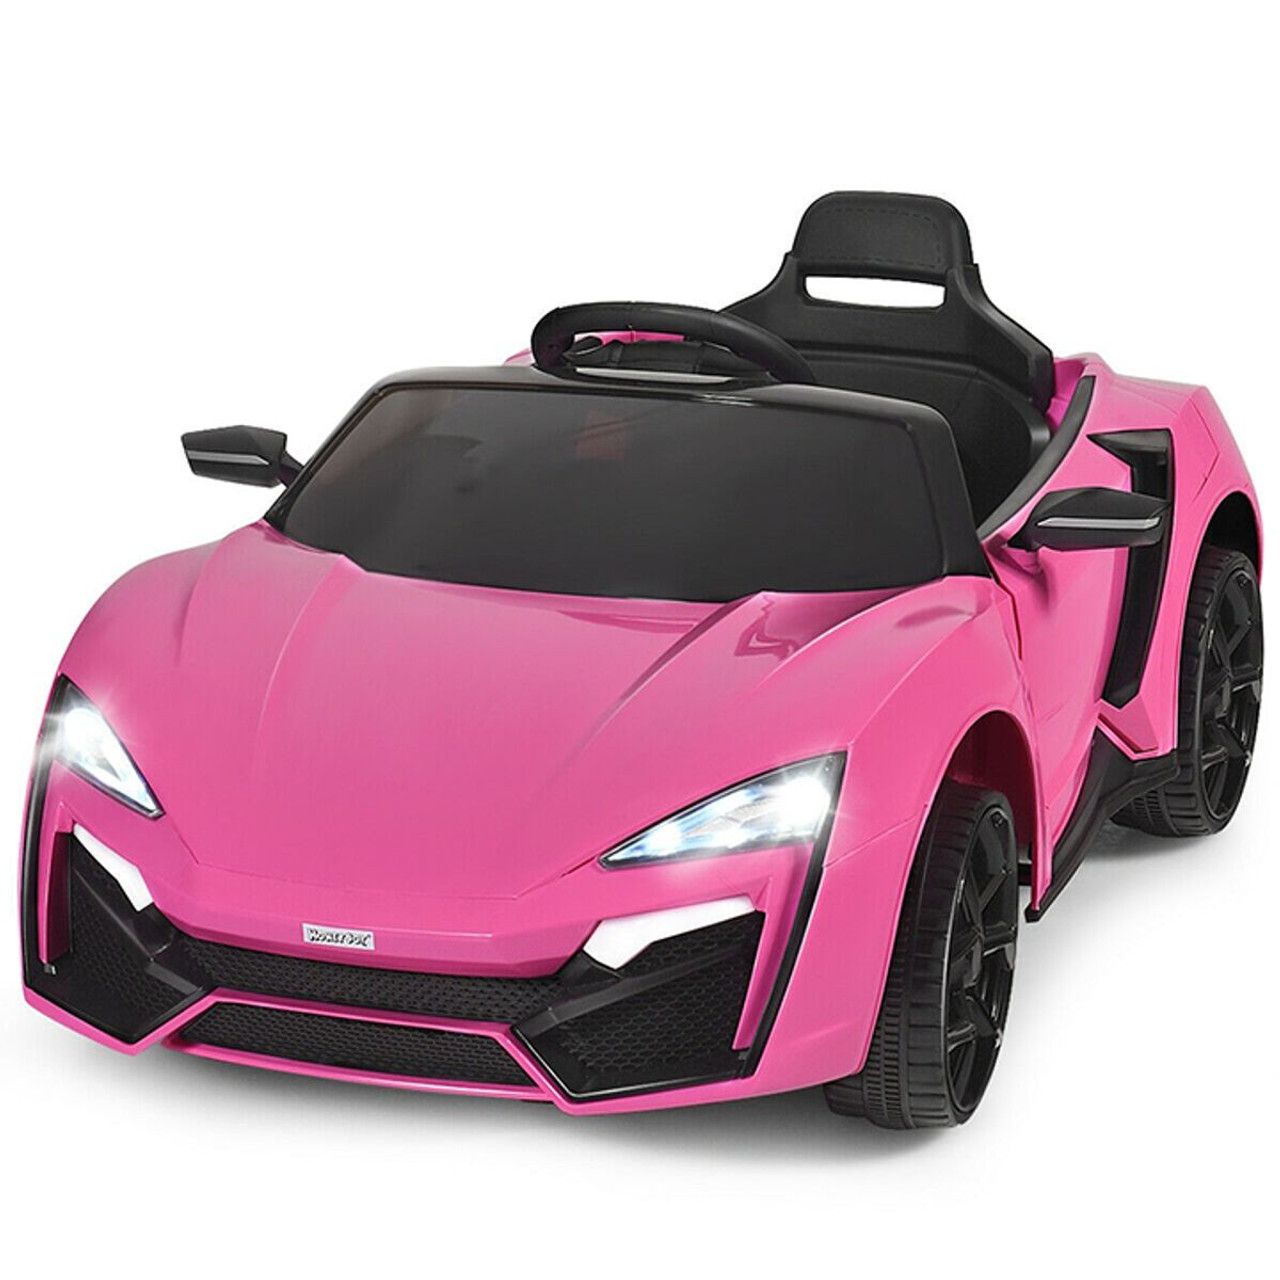 Kids' 12V Electric Ride-on Sports Car with Parent Safety Remote